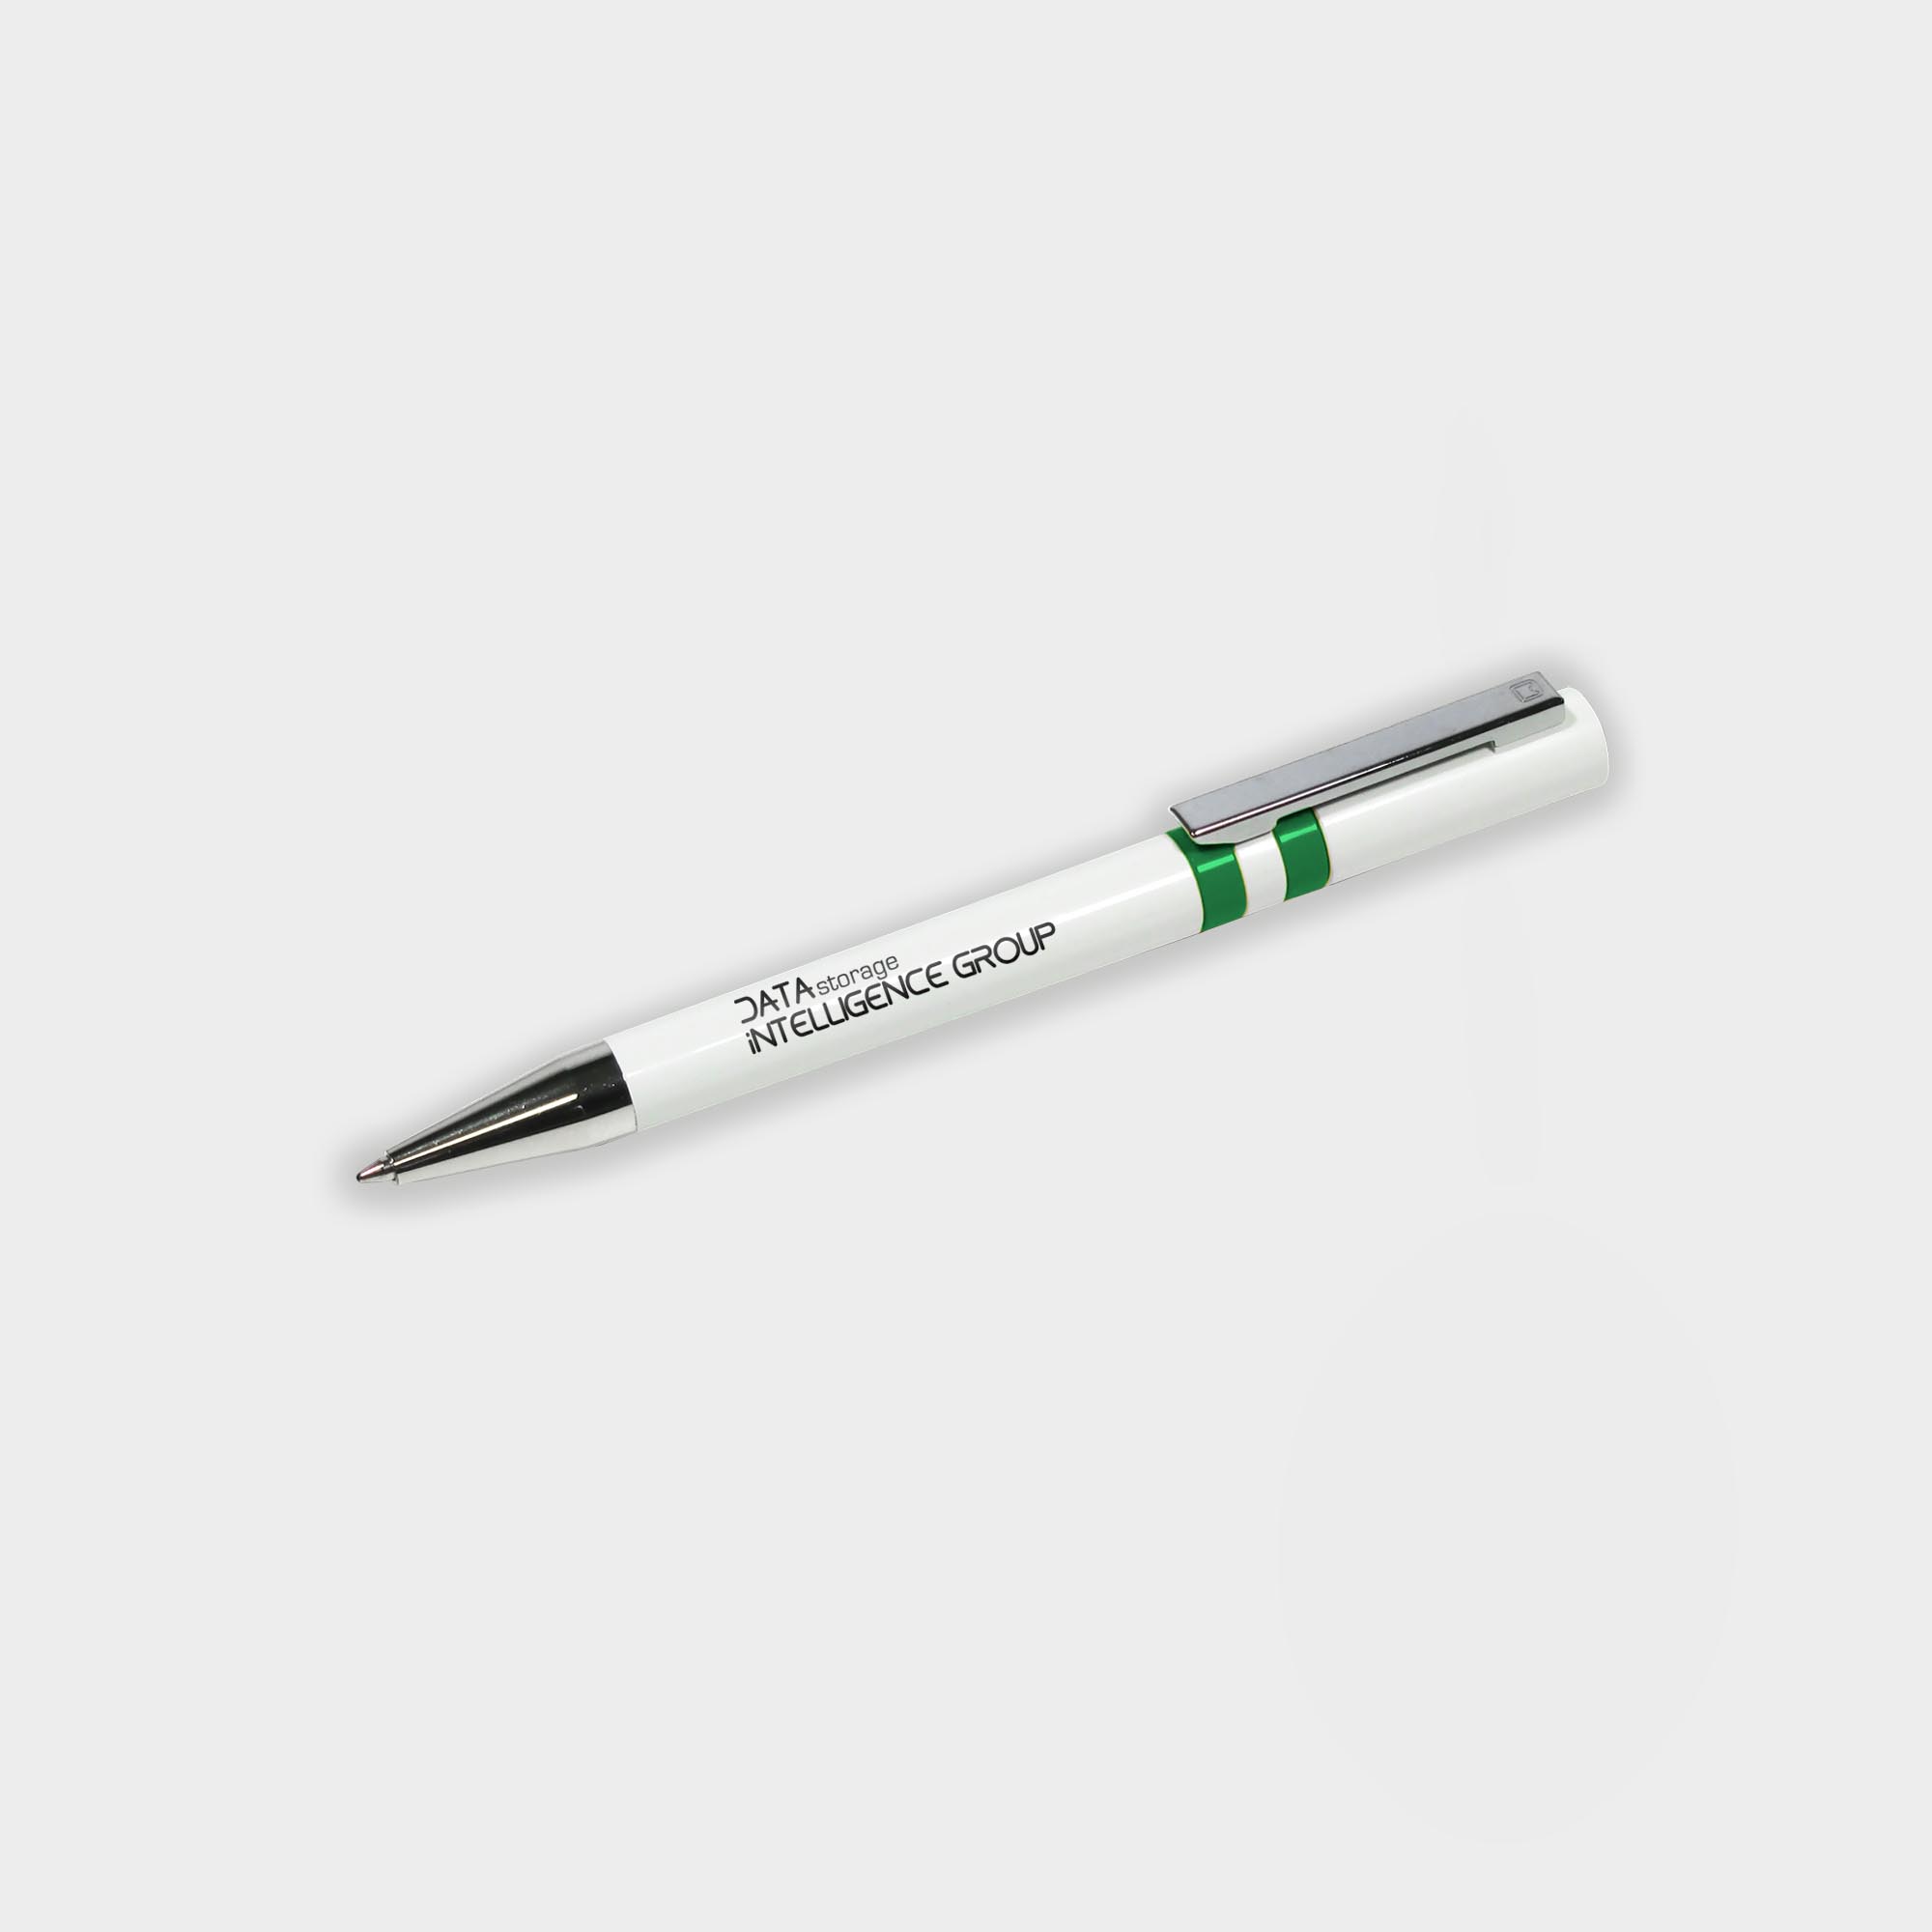 The Green & Good Ethic Pen made from recycled plastic. Stylish executive pen with chrome tip and various colour upon request. Black ink as standard. White / Green